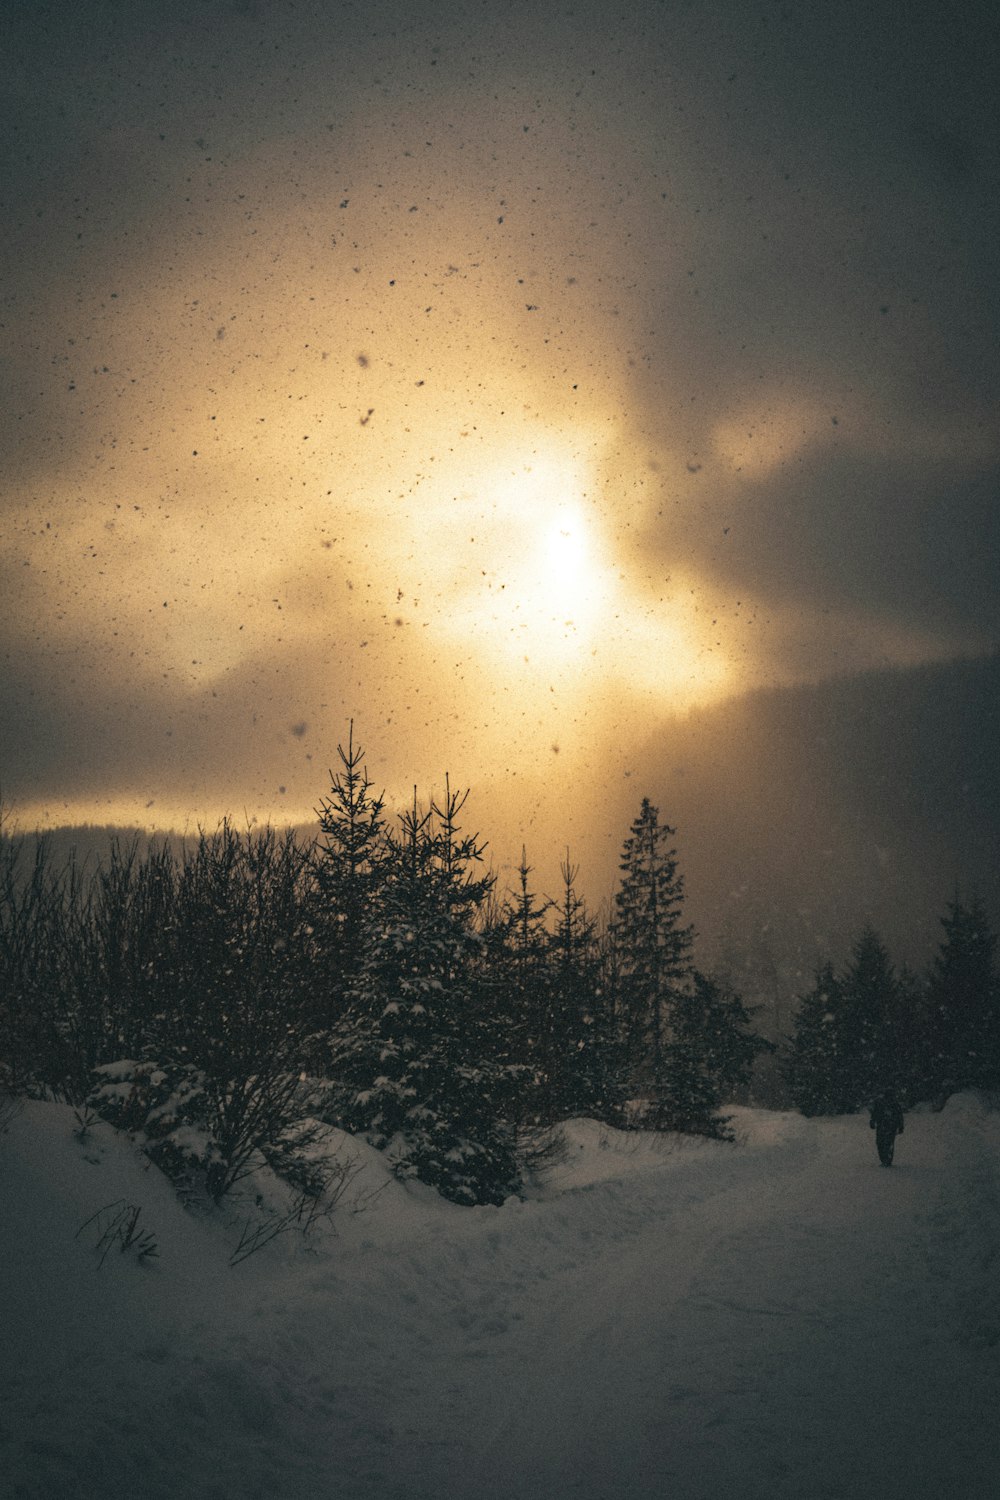 a snowy landscape with trees and the sun in the sky